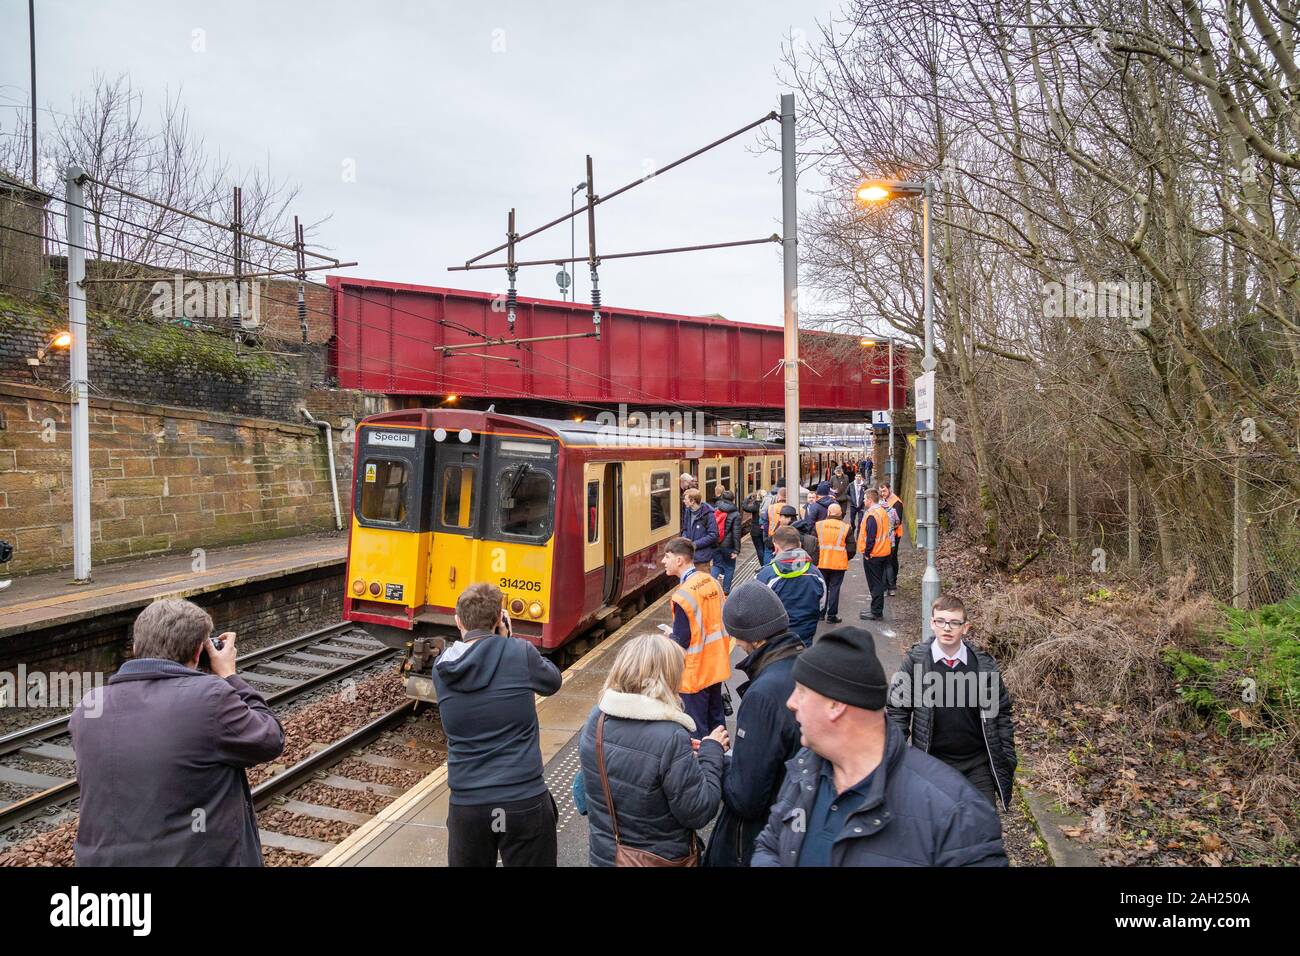 On Wednesday 18th December 2019 Scotrail operated a Class 314 electric train farewell tour to mark the retiral of this train class after 40 years Stock Photo